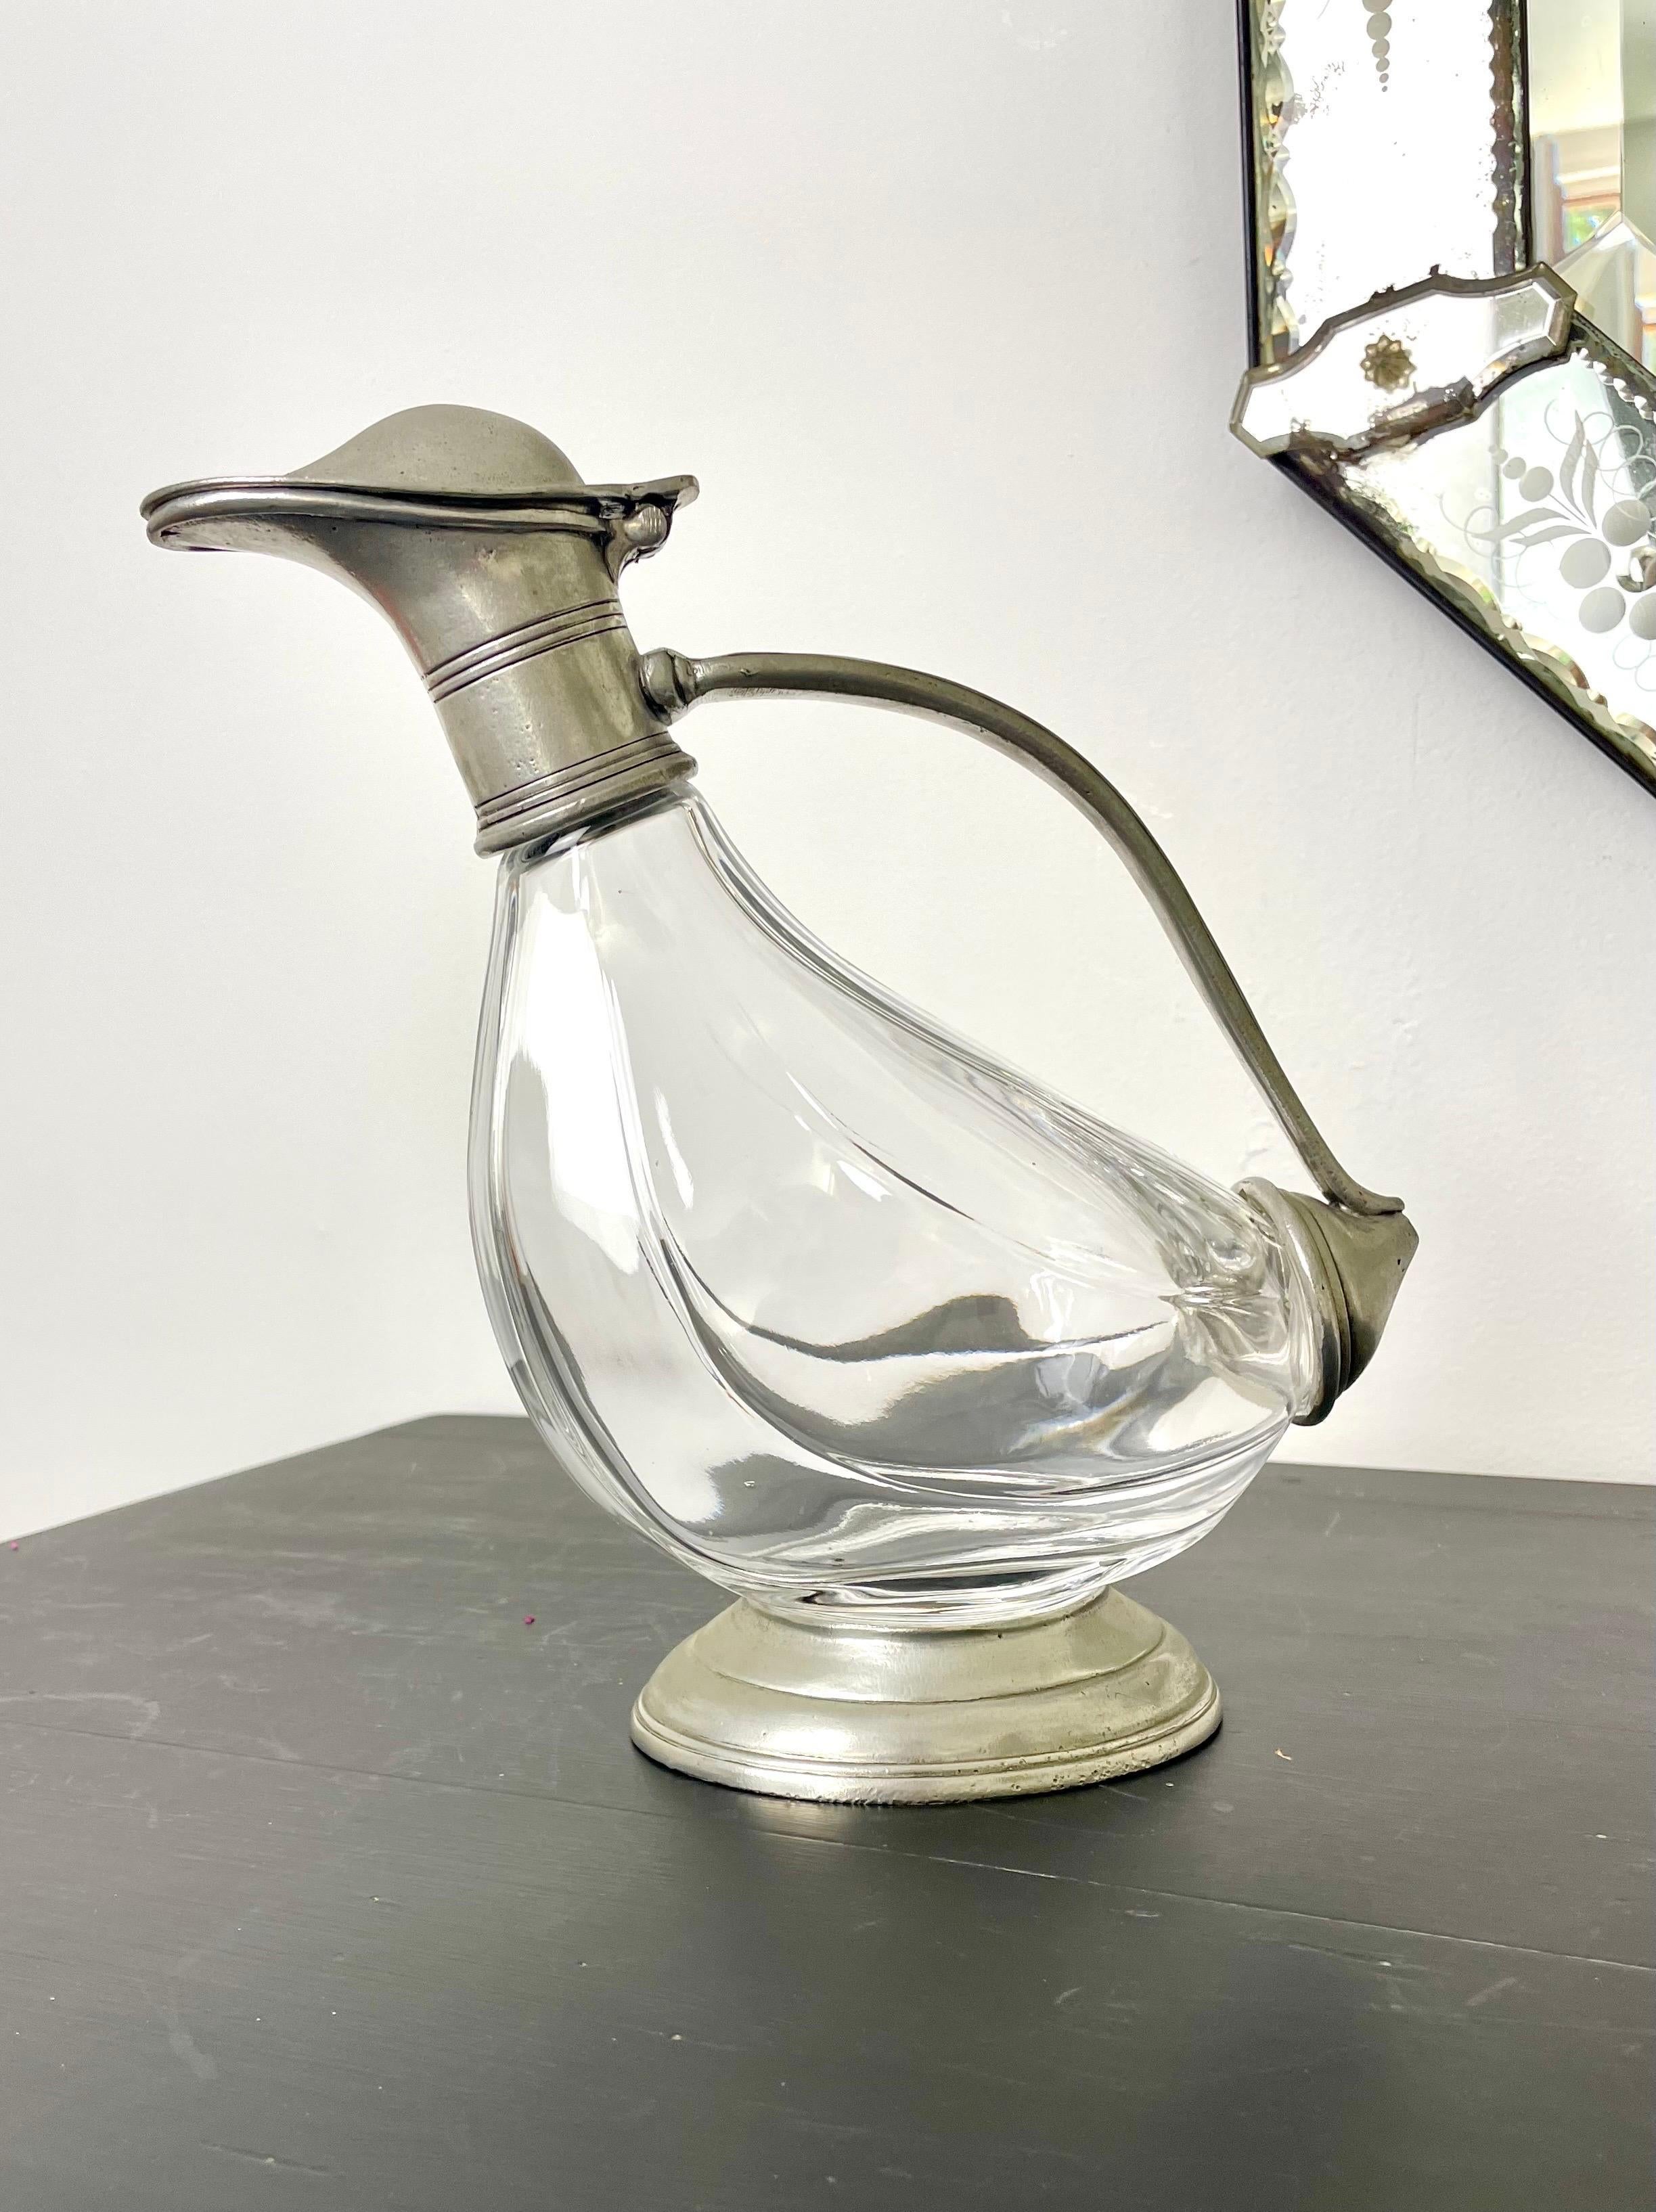 Very beautiful carafe, pitcher, jug, in crystal and engraved pewter.
Nice work of crystal and pewter.
This carafe brings a touch of French elegance to the table decoration.
Ideal for decanting and serving wine or liquor.
The decanter is in the shape